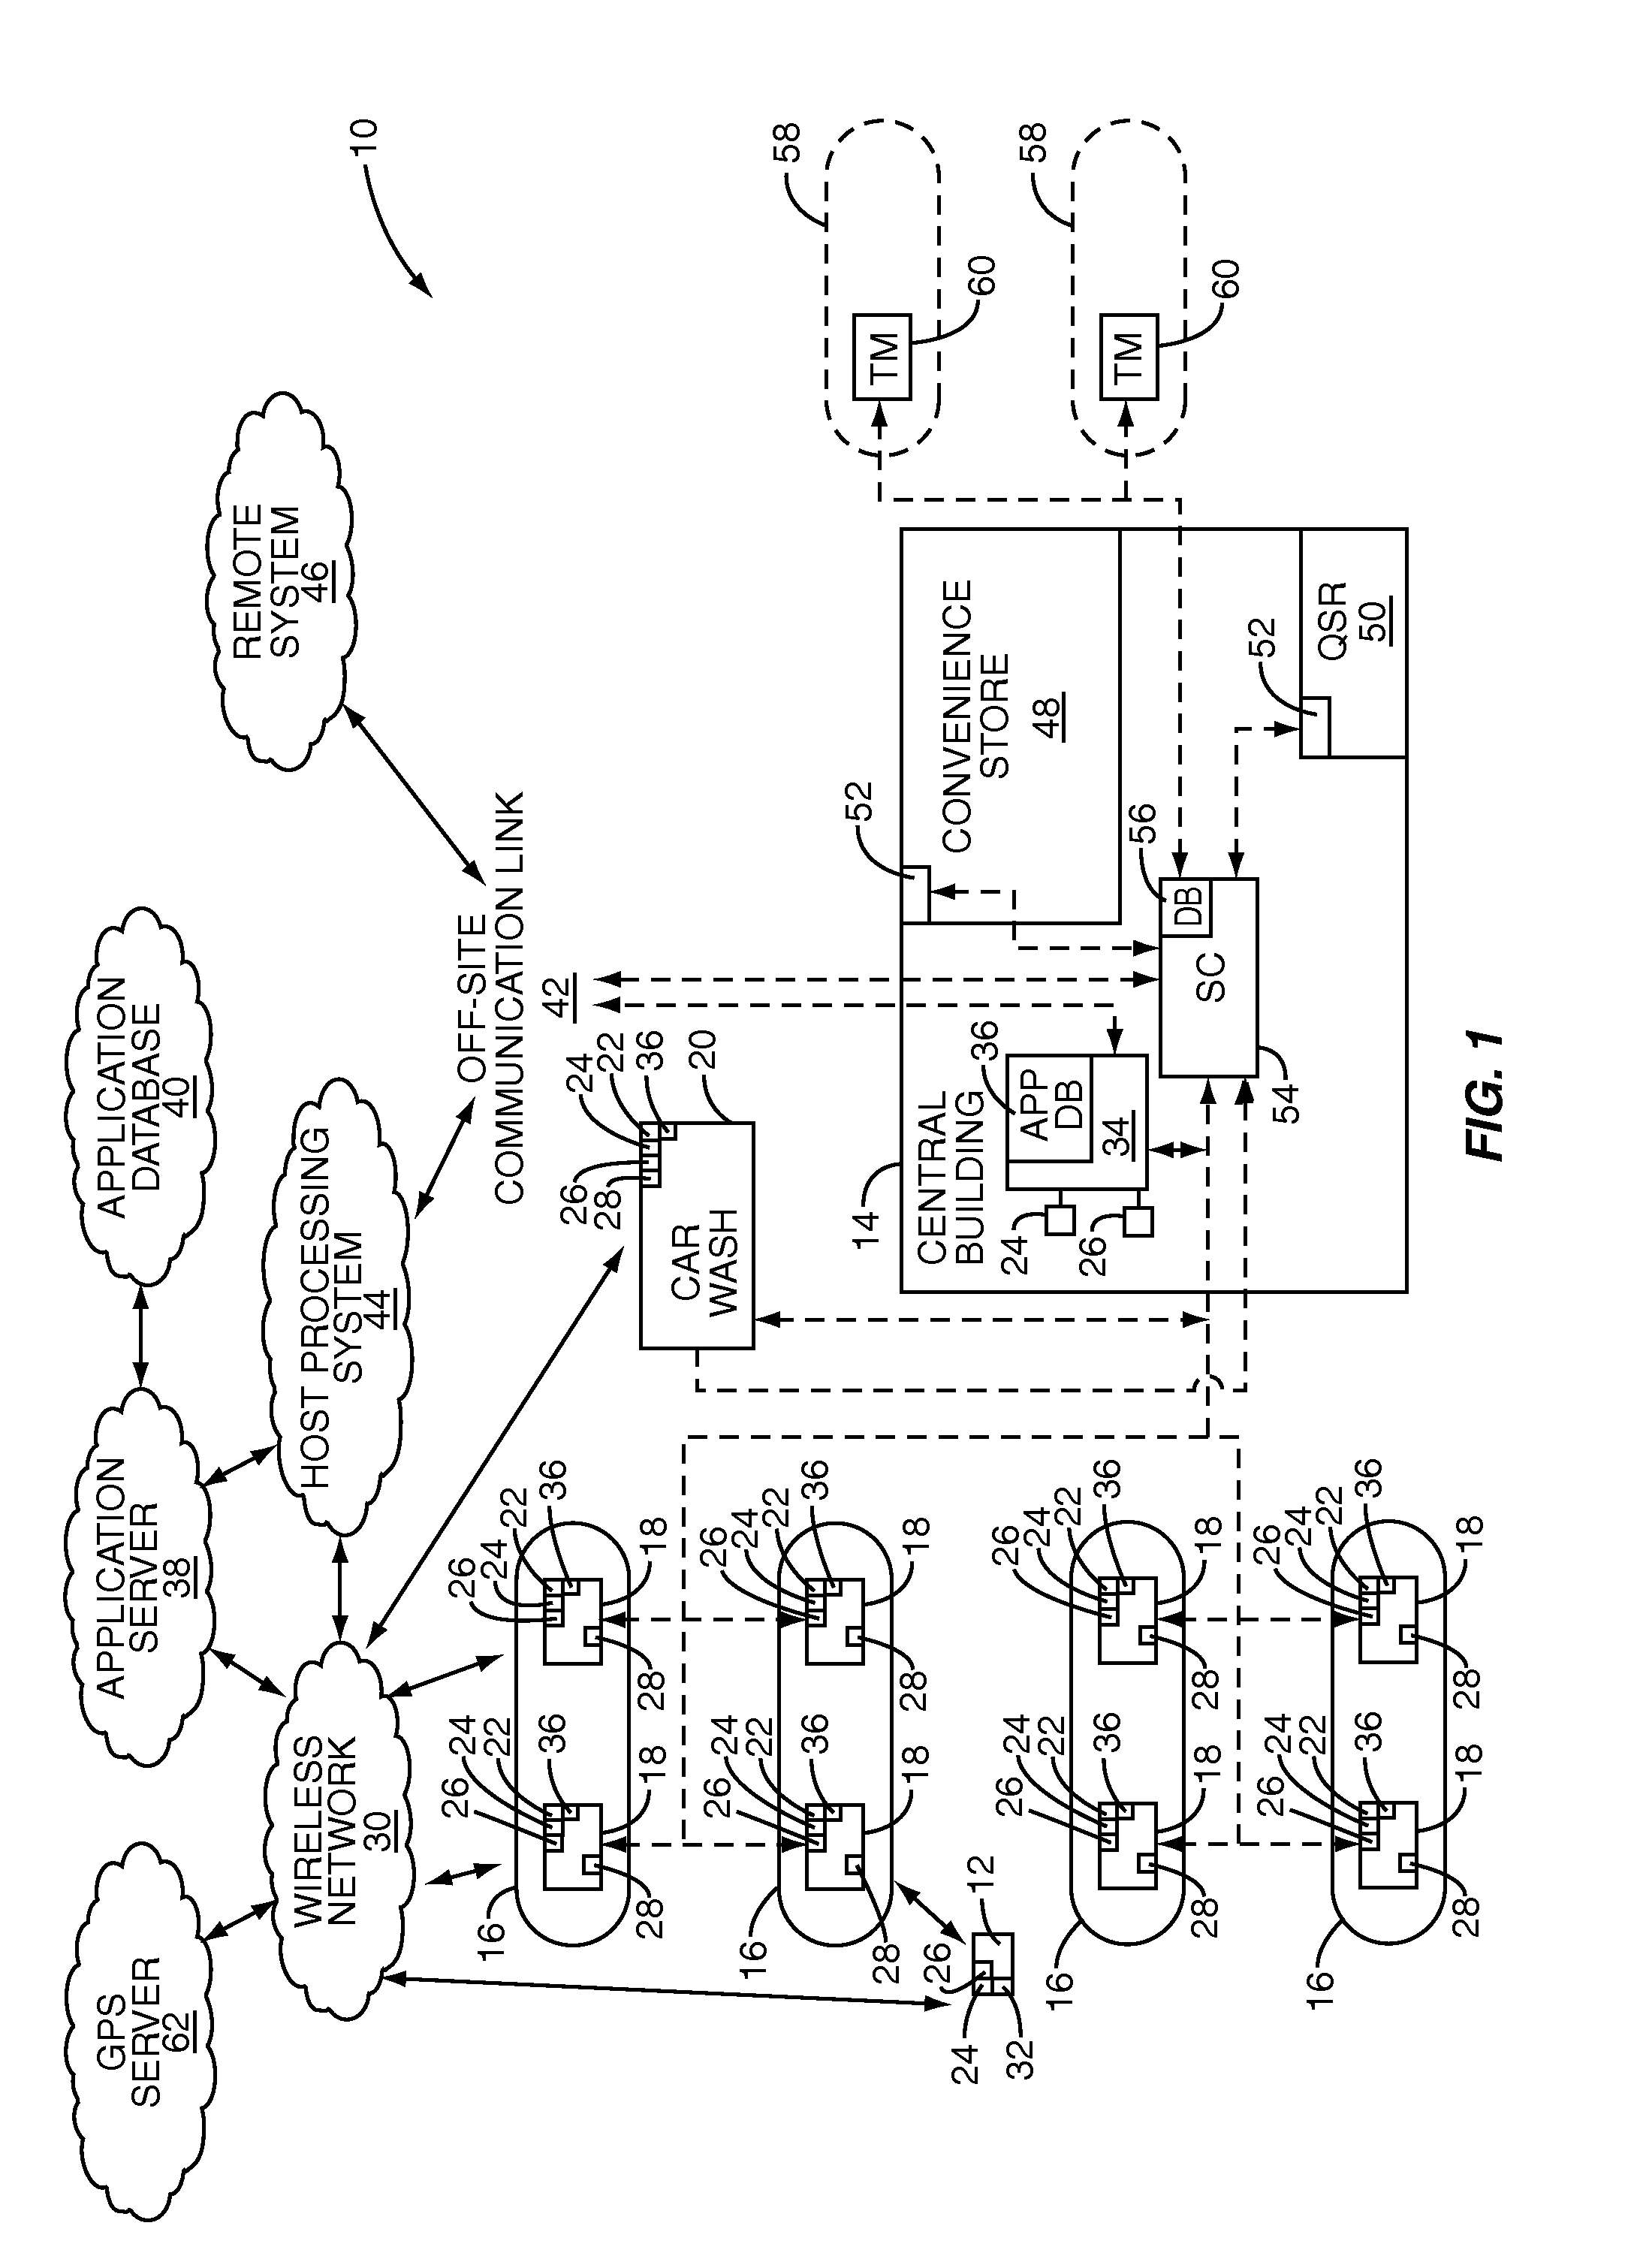 System and method for consumer notification that an order is ready for pick up via an application-specific user interface on a personal communication device